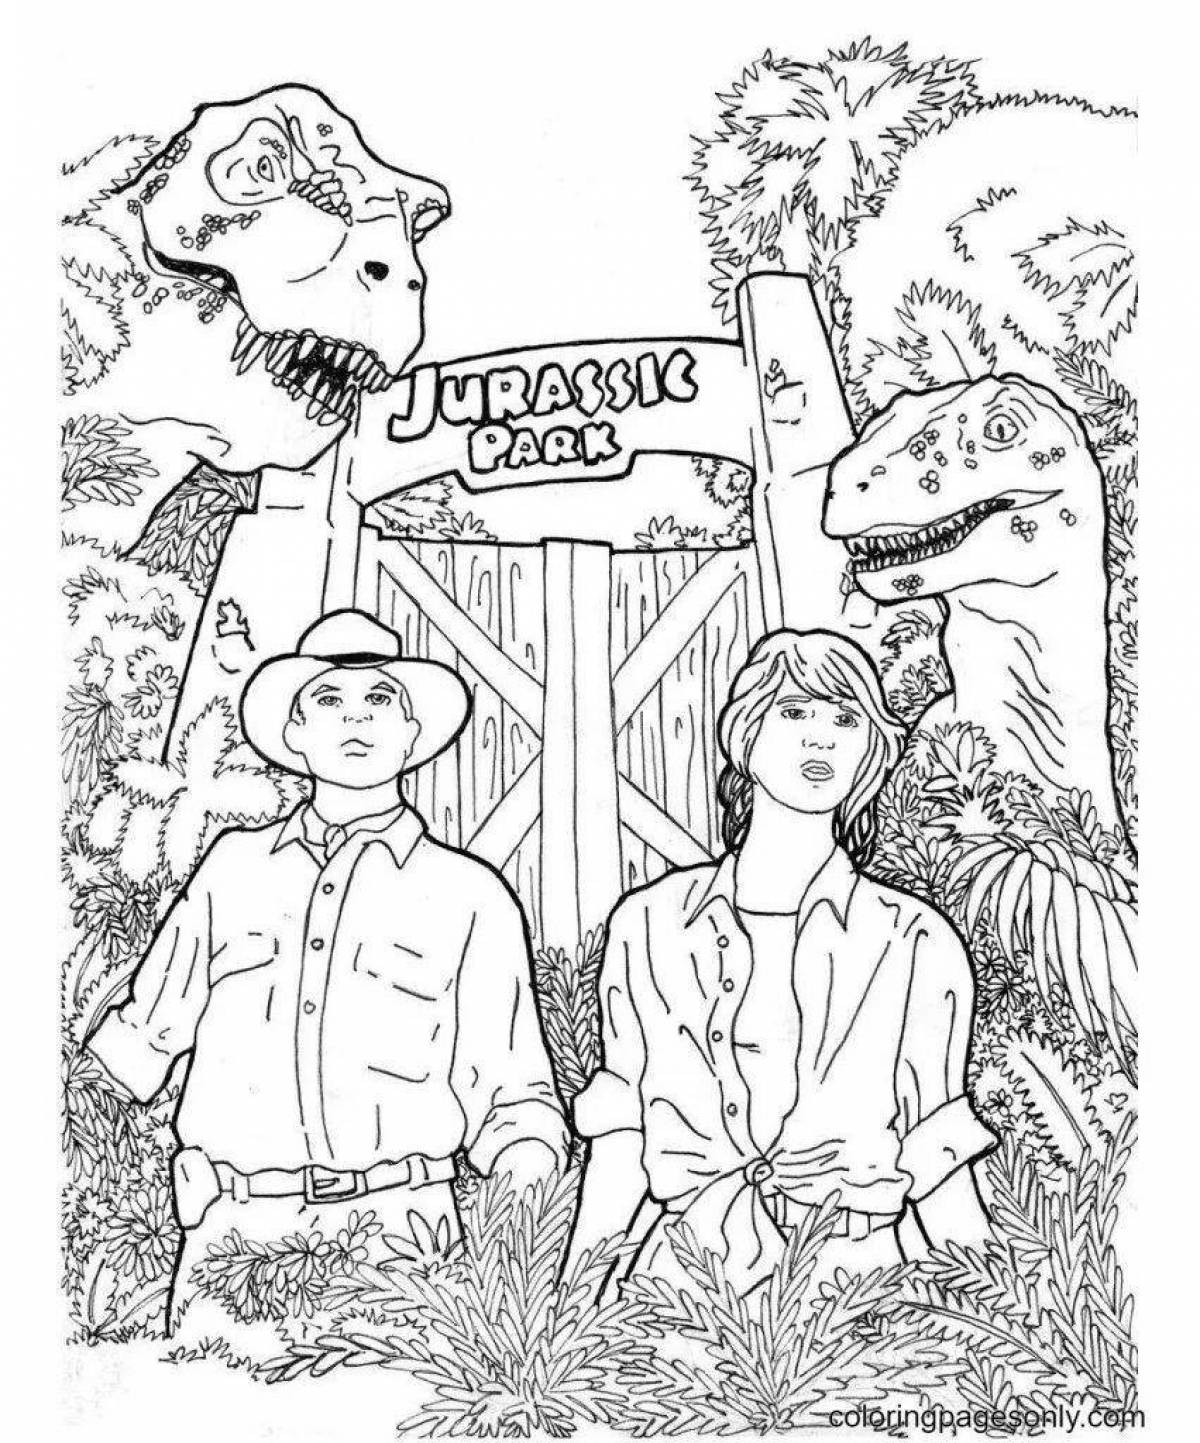 Jurassic park giant dinosaurs coloring pages